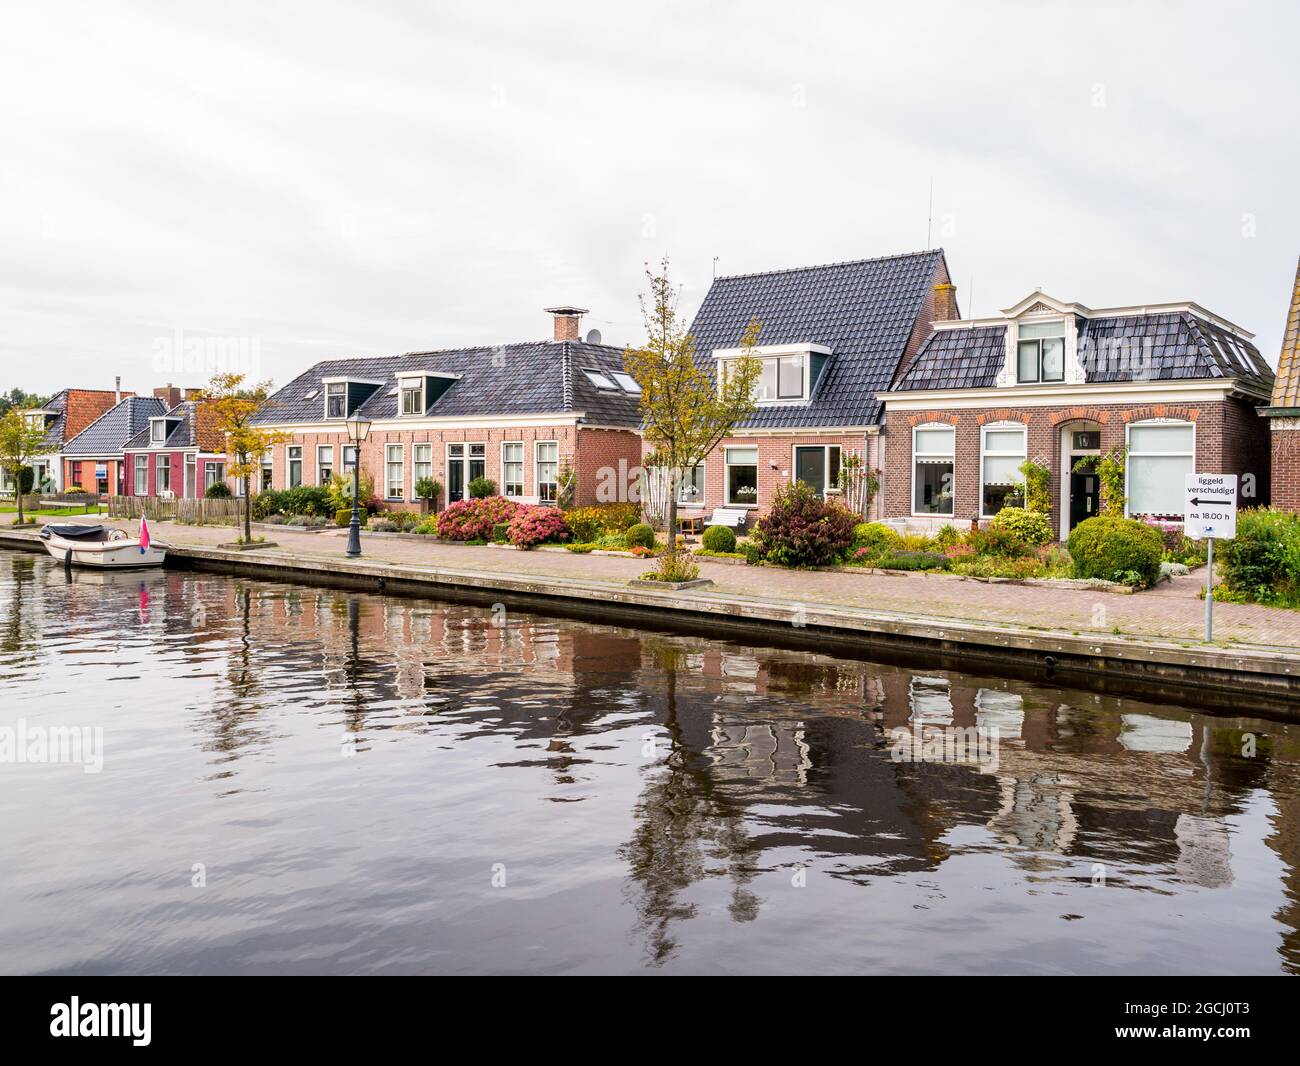 Houses by canal in old village of Wartena, Leeuwarden, Friesland, Netherlands Stock Photo